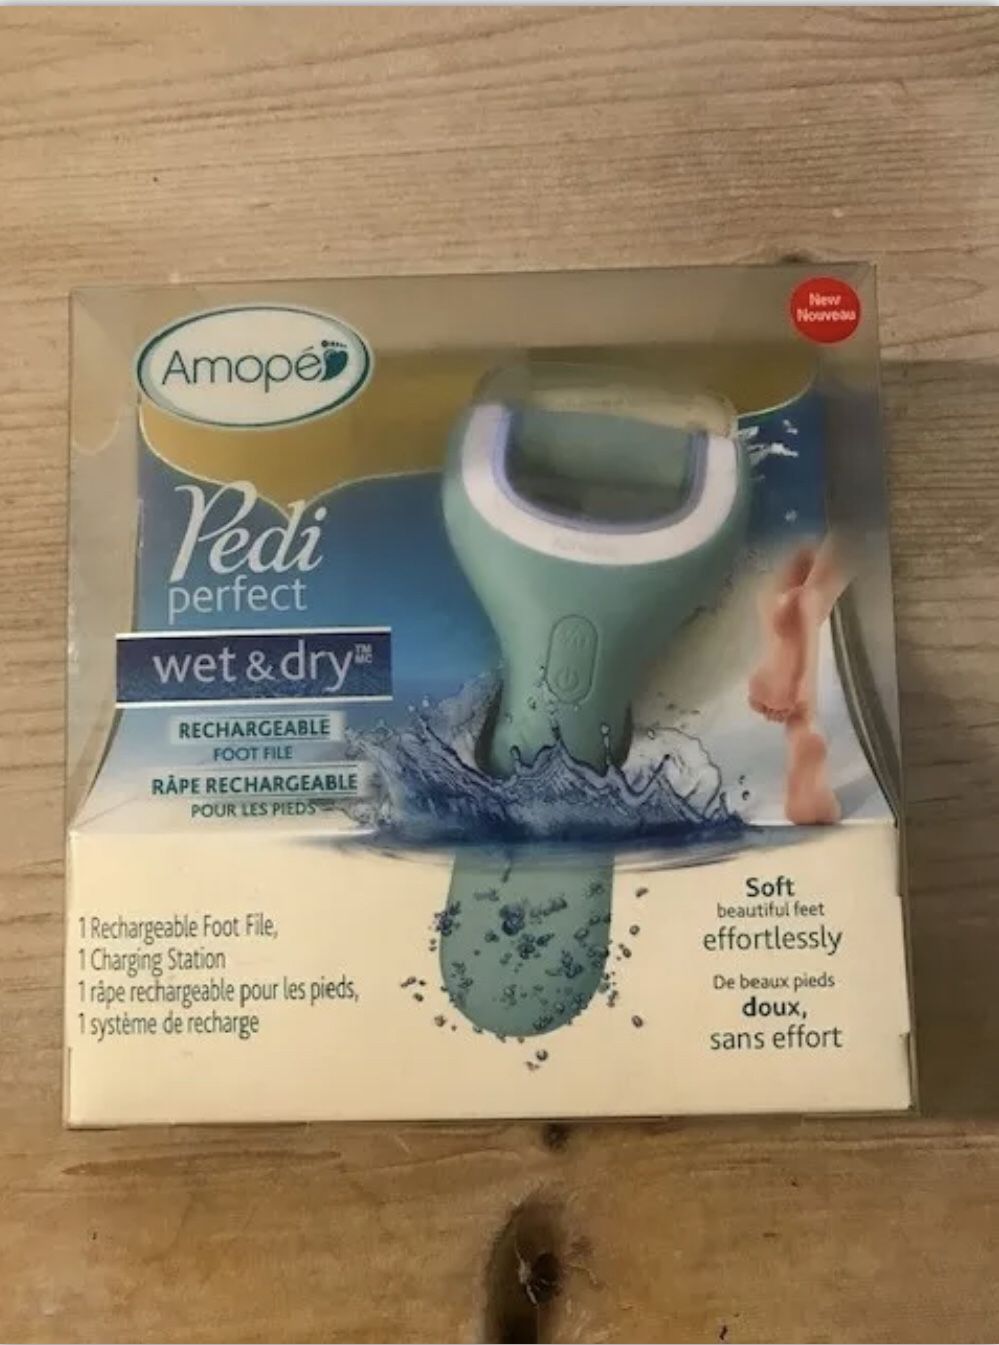 Brand new Amope Wet & Dry Rechargeable Pedi - below retail price